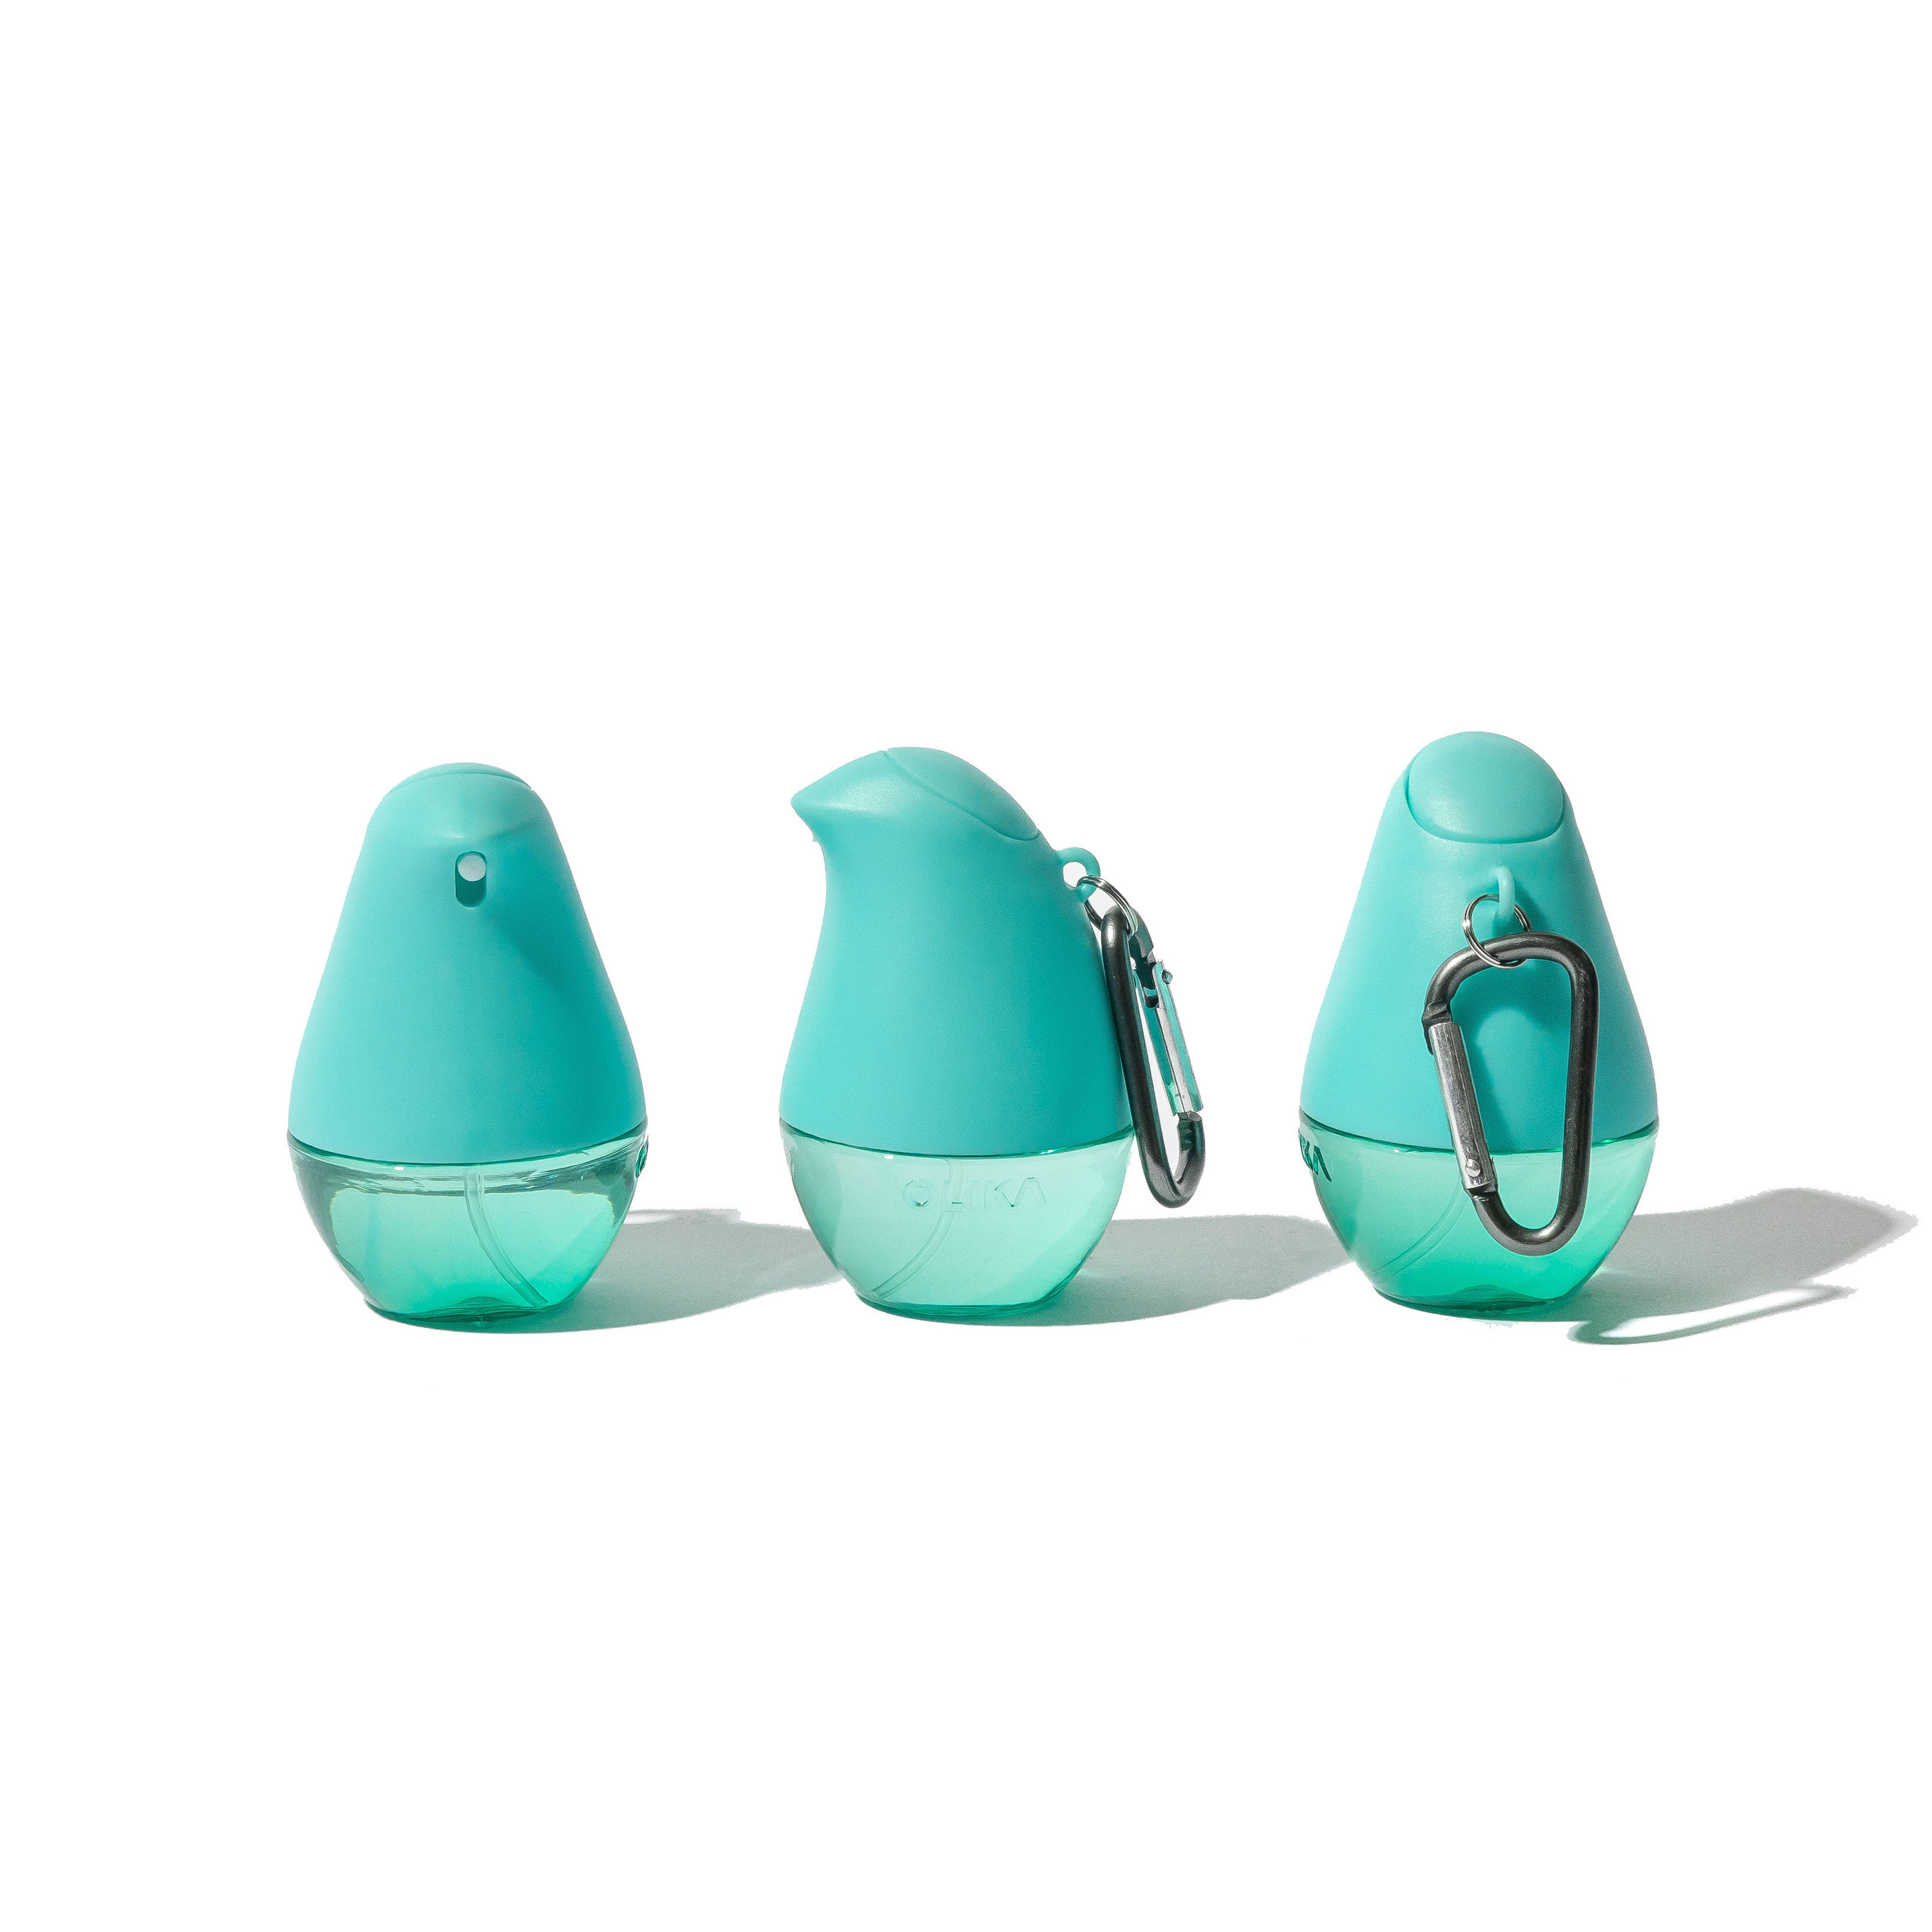 Three small hand sanitizer containers that look like birds in teal at different angles, showing what it looks like from all sides with a carabiner attached to each. 